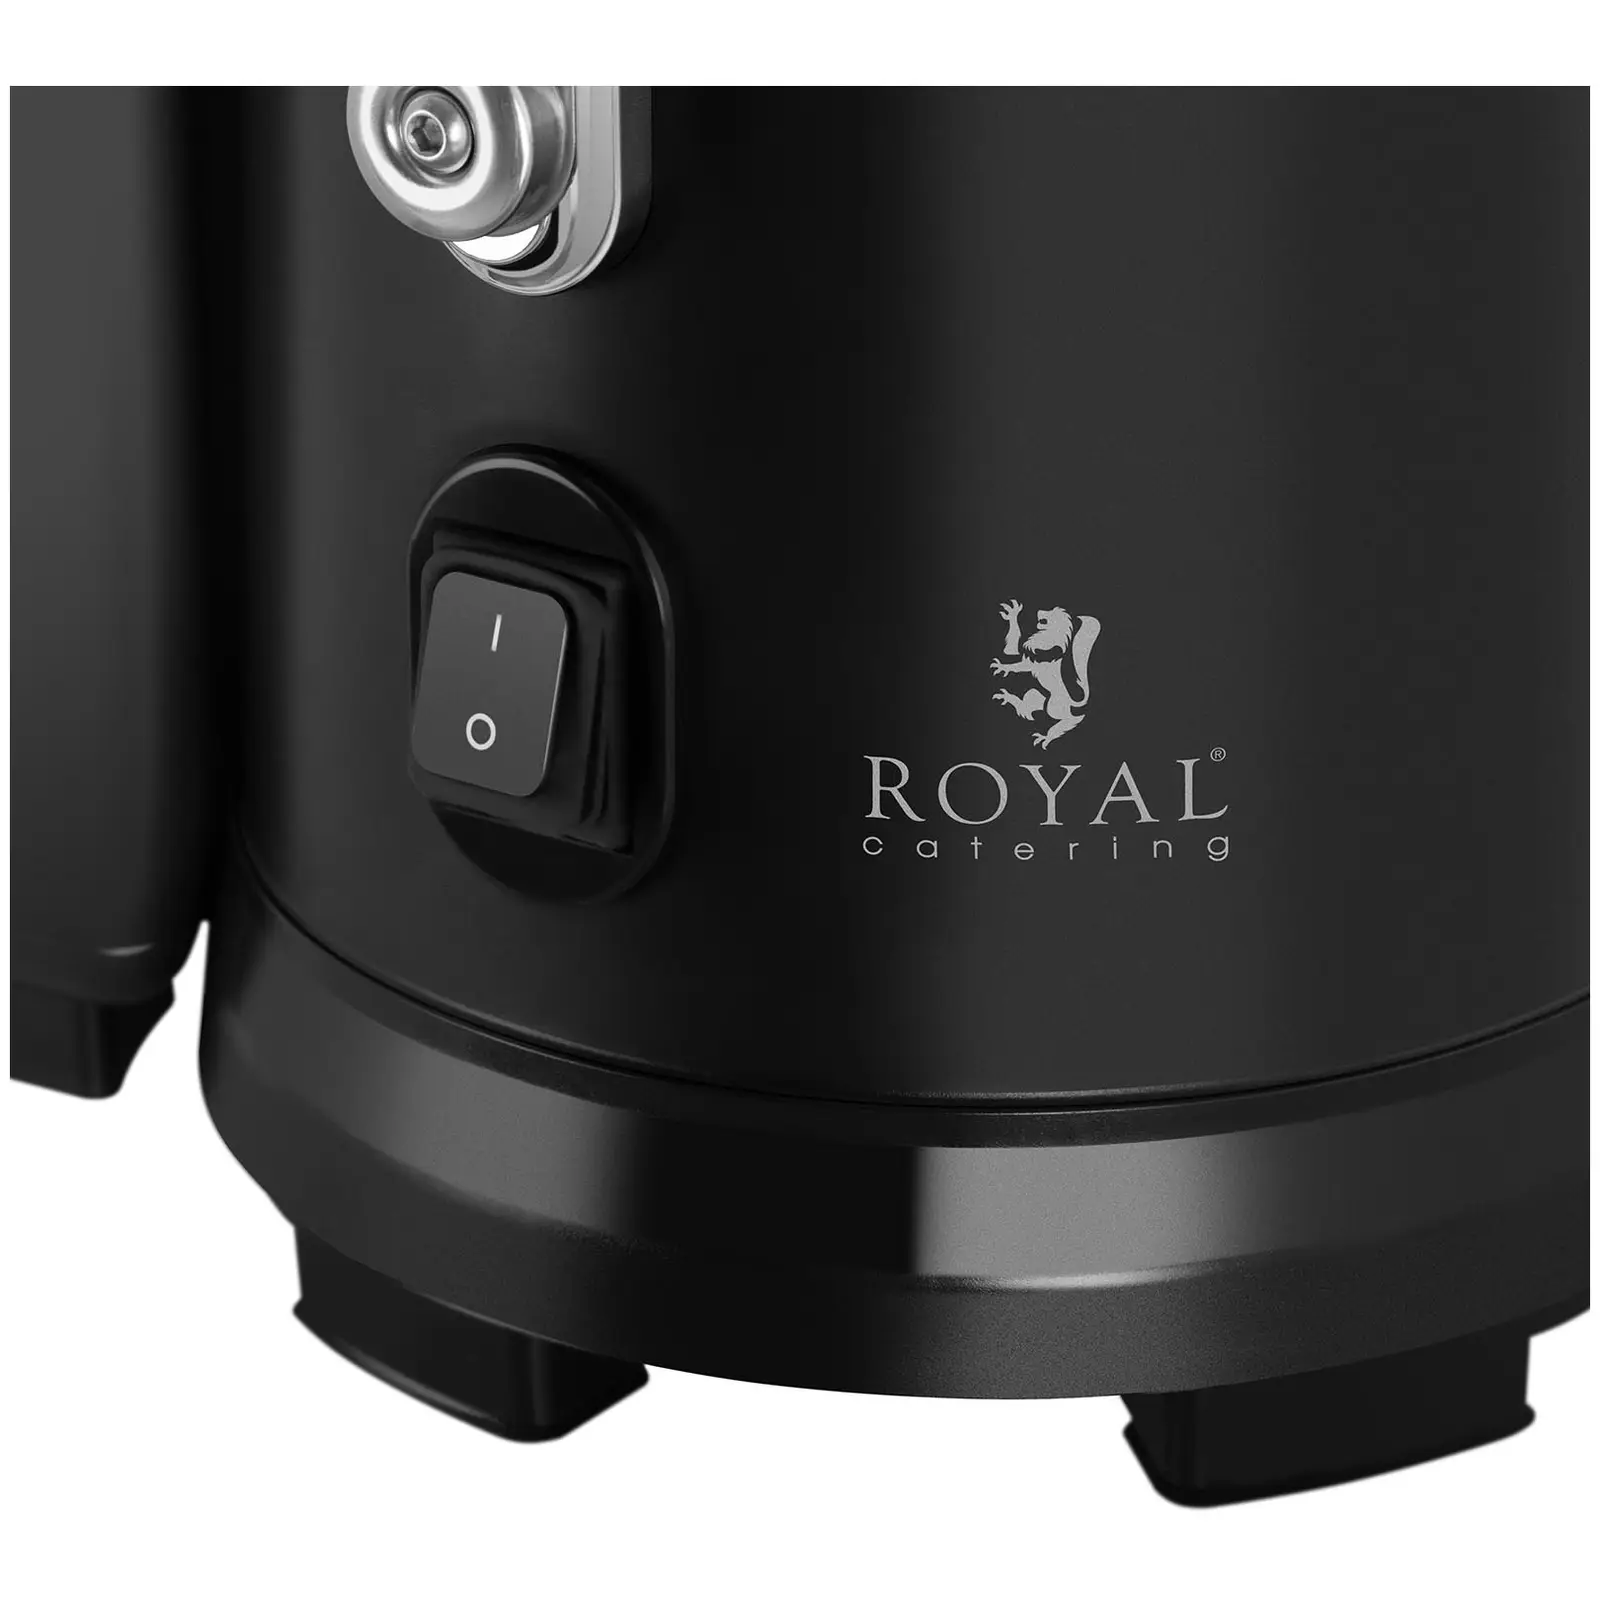 Entsafter - 800 W - Royal Catering